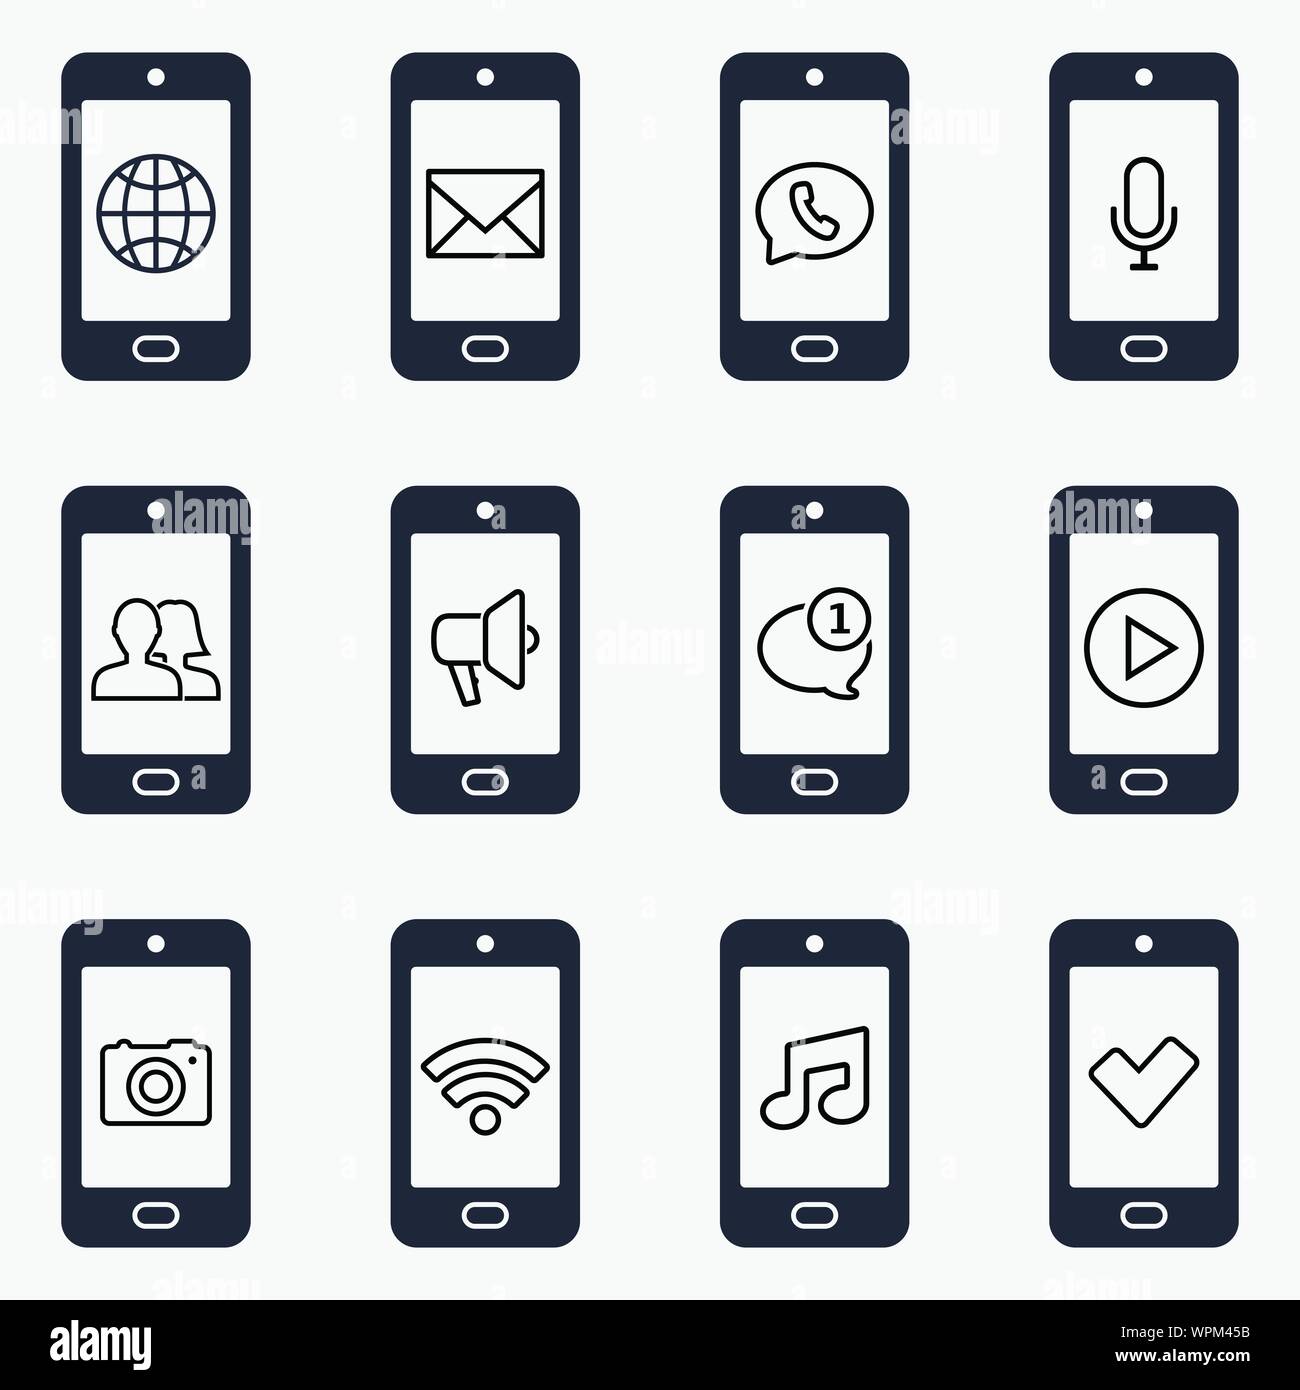 Smartphone icon set. Smartphone function icons Stock Vector